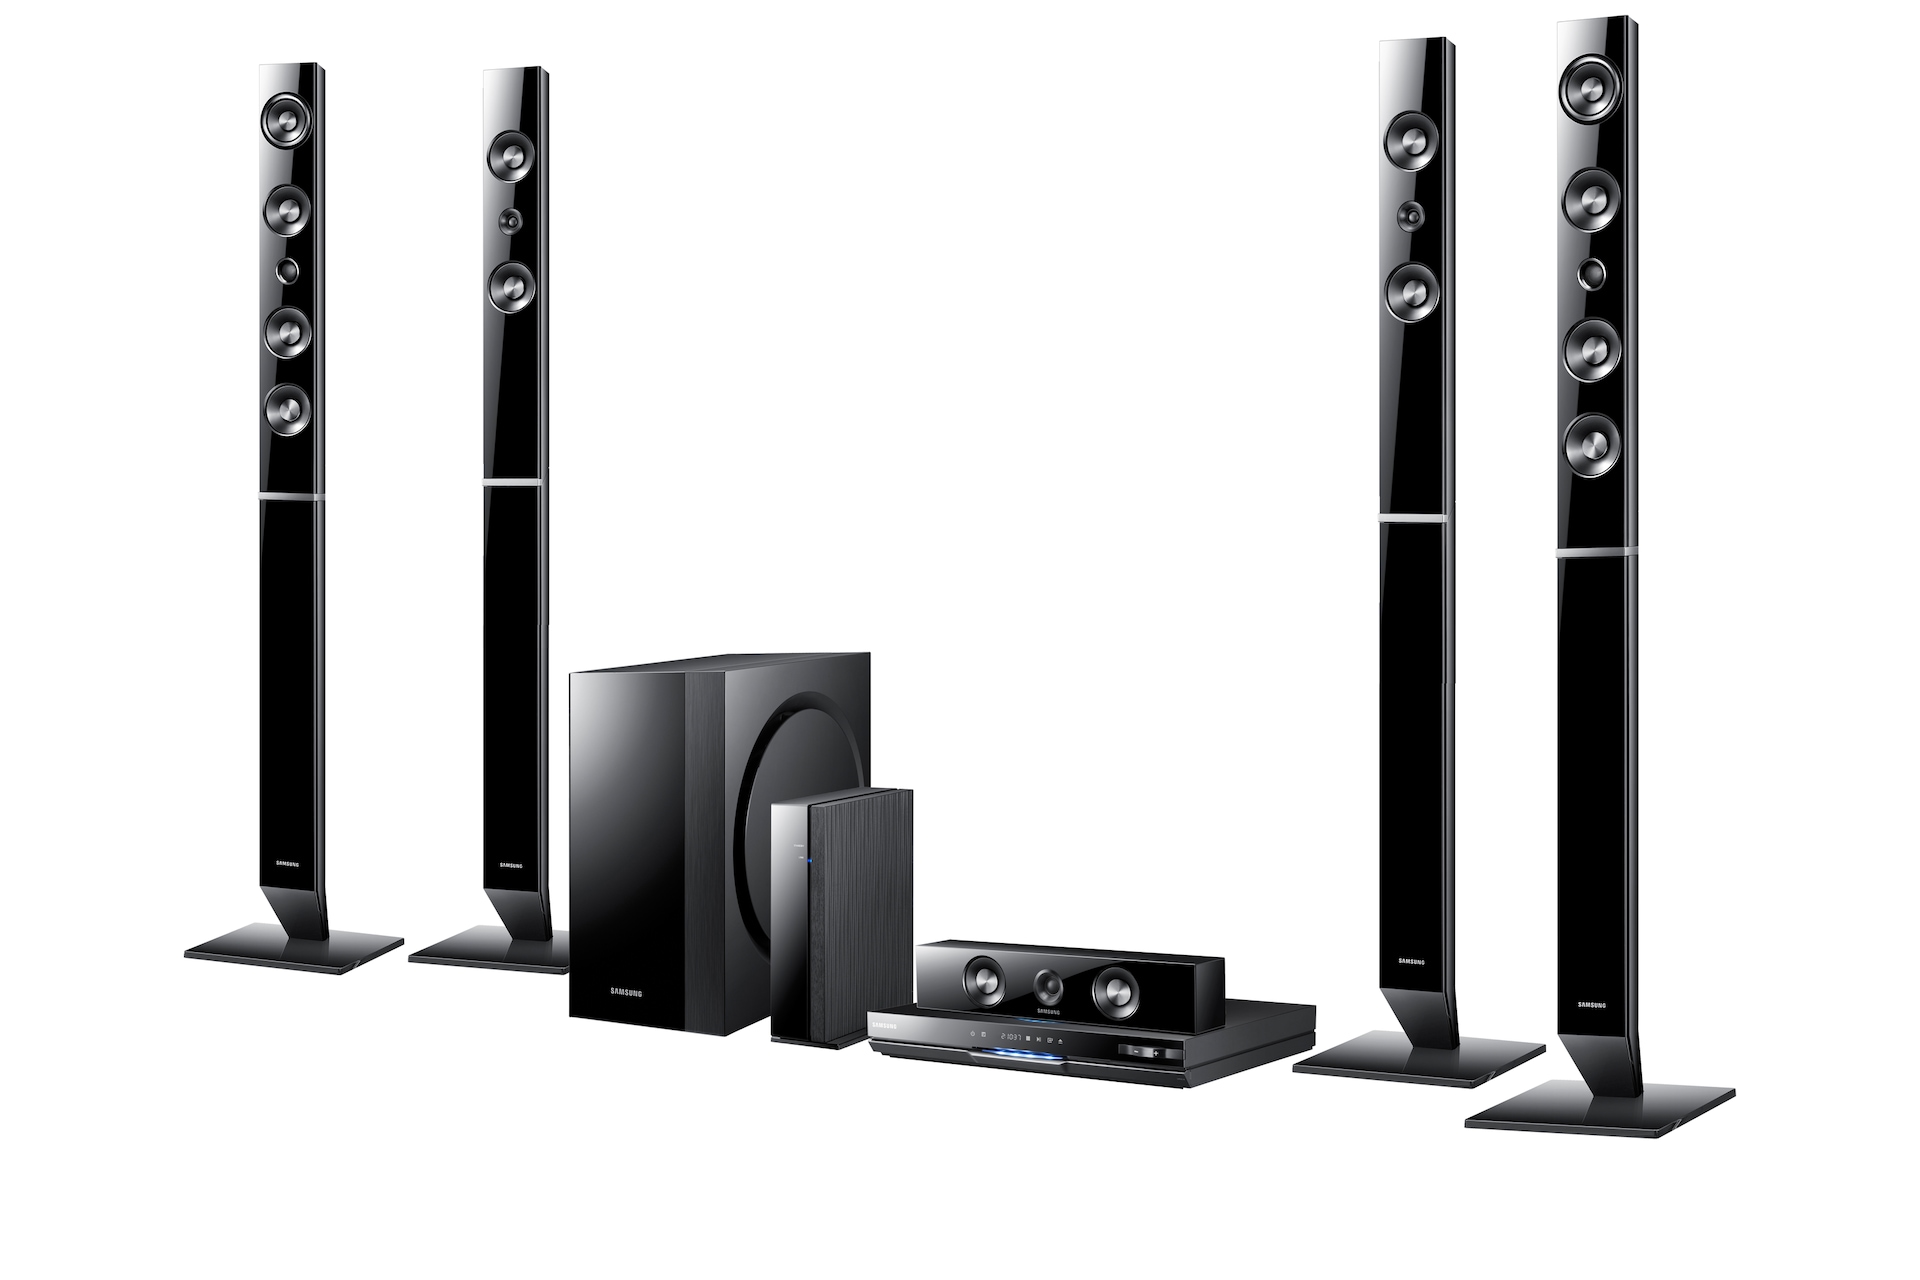 Ht D6750w 3d Blu Ray 7 1ch Home Entertainment System Samsung Ireland